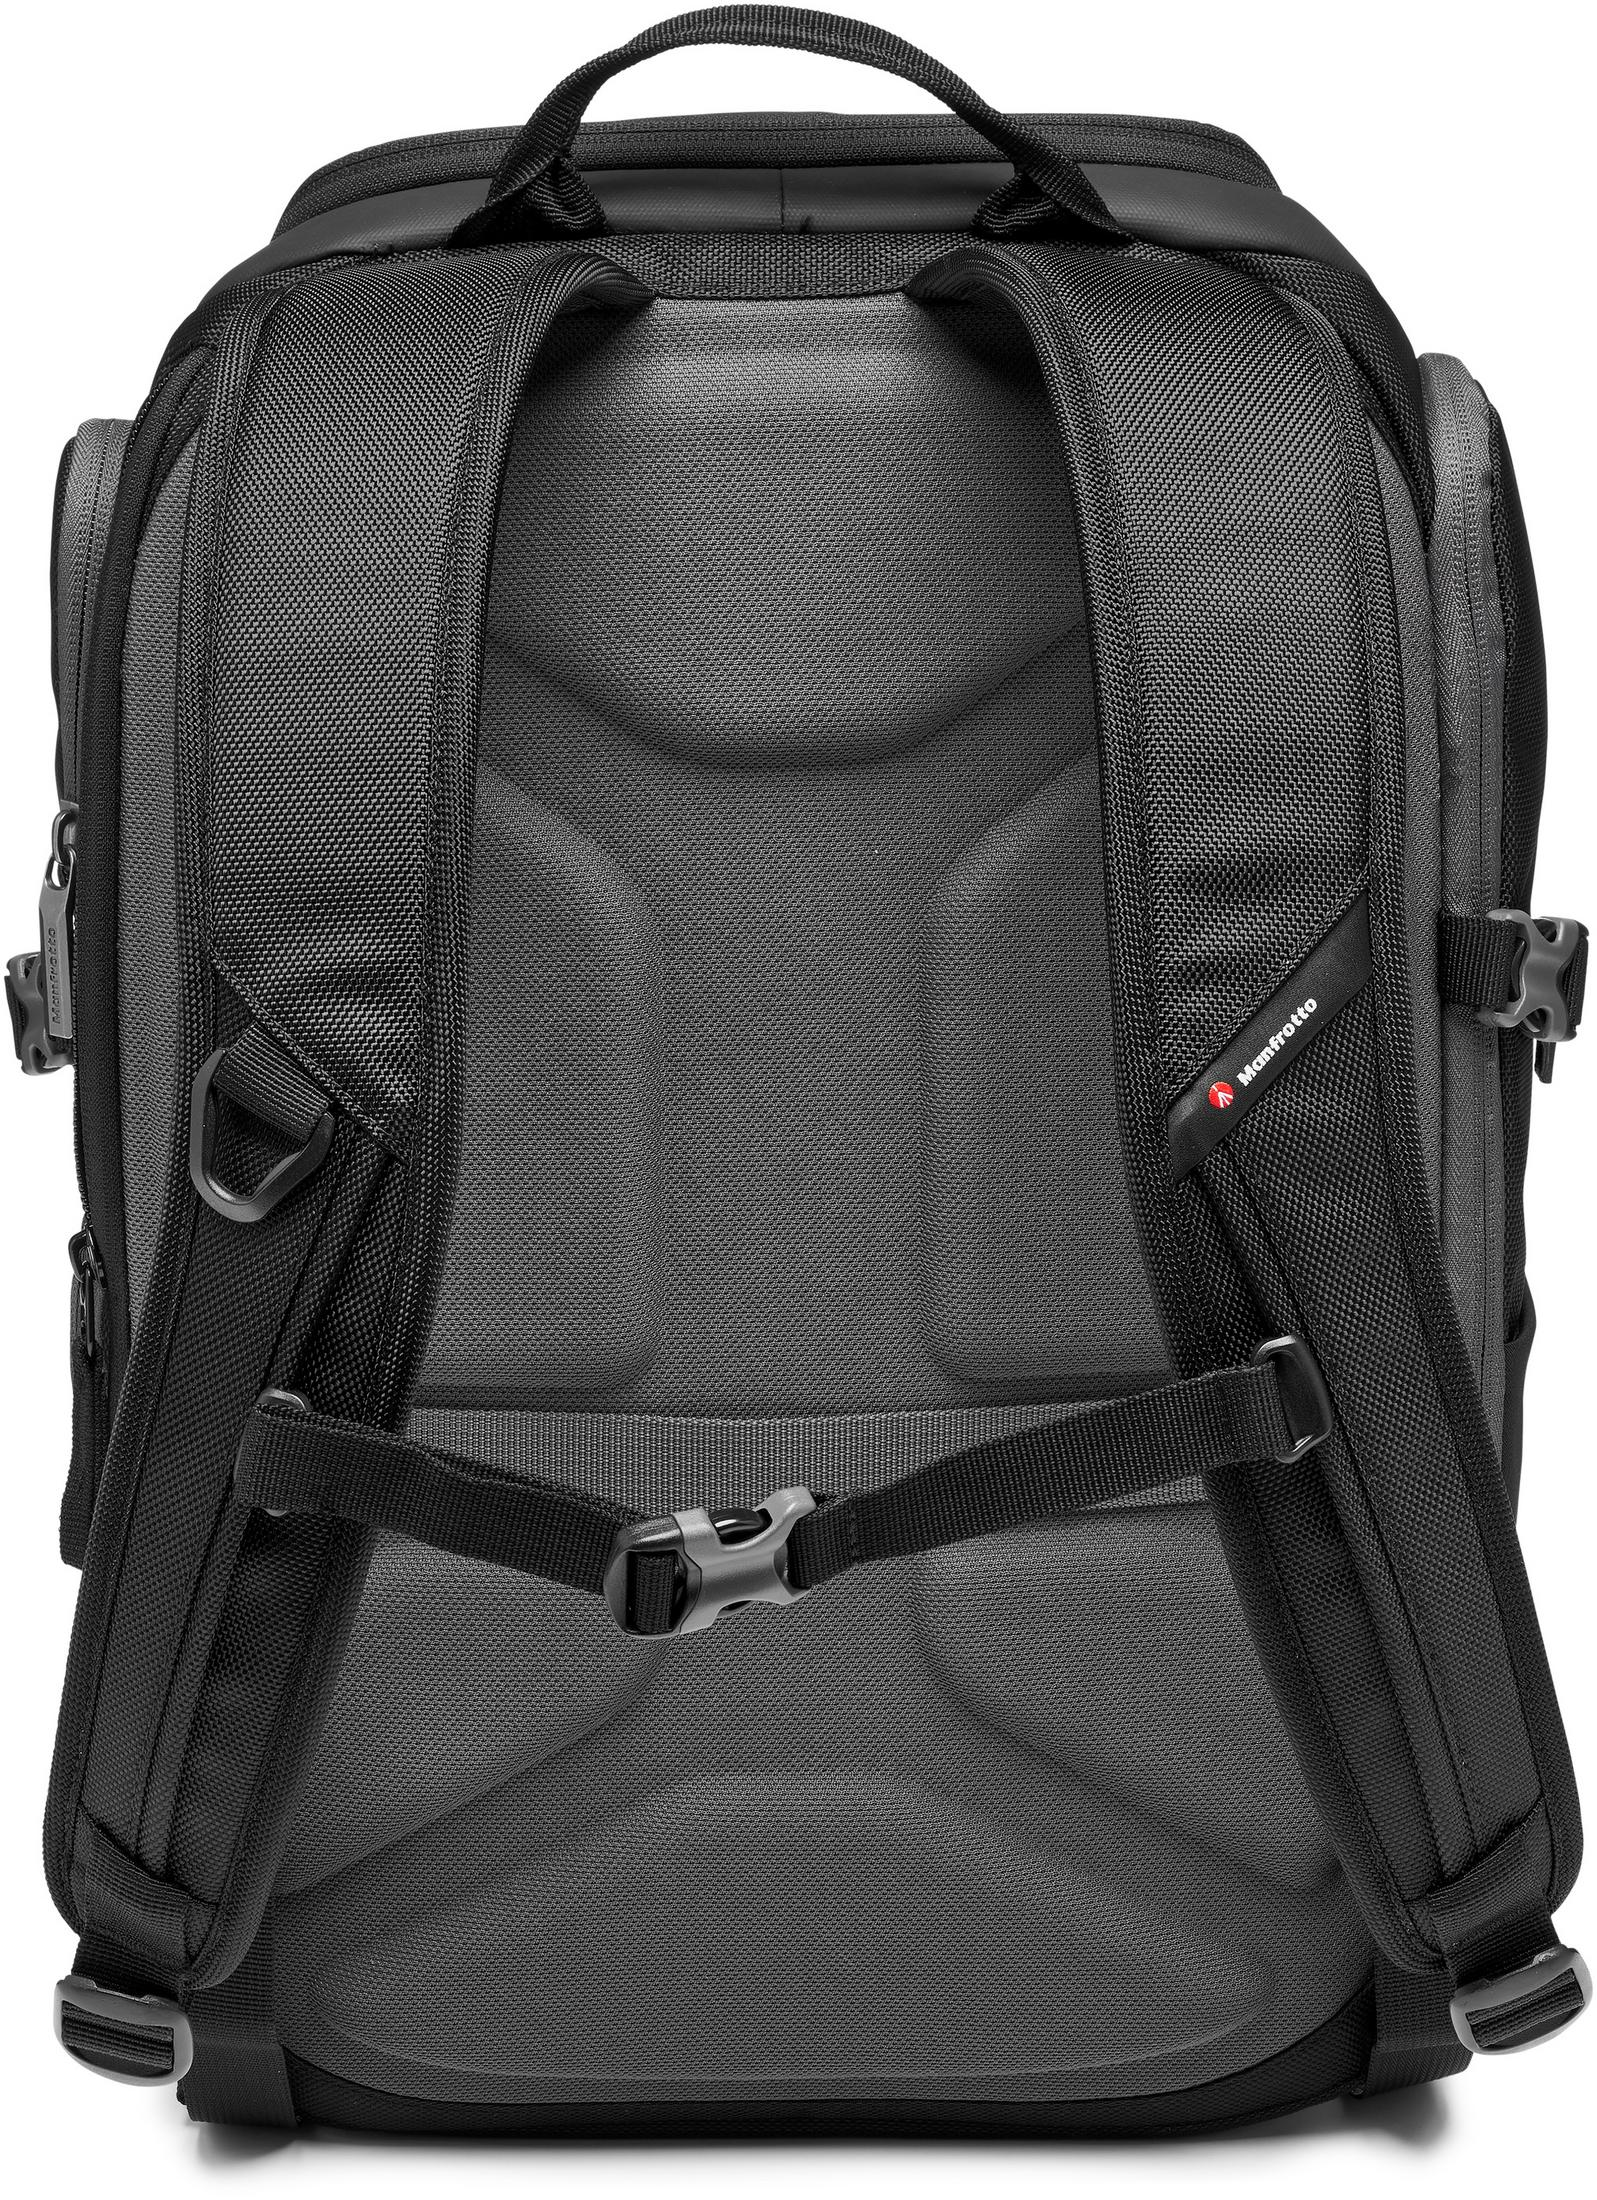 MANFROTTO MB Schwarz BACKPACK Kameratasche, TRAVEL ADVANCED2 MA2-BP-T M